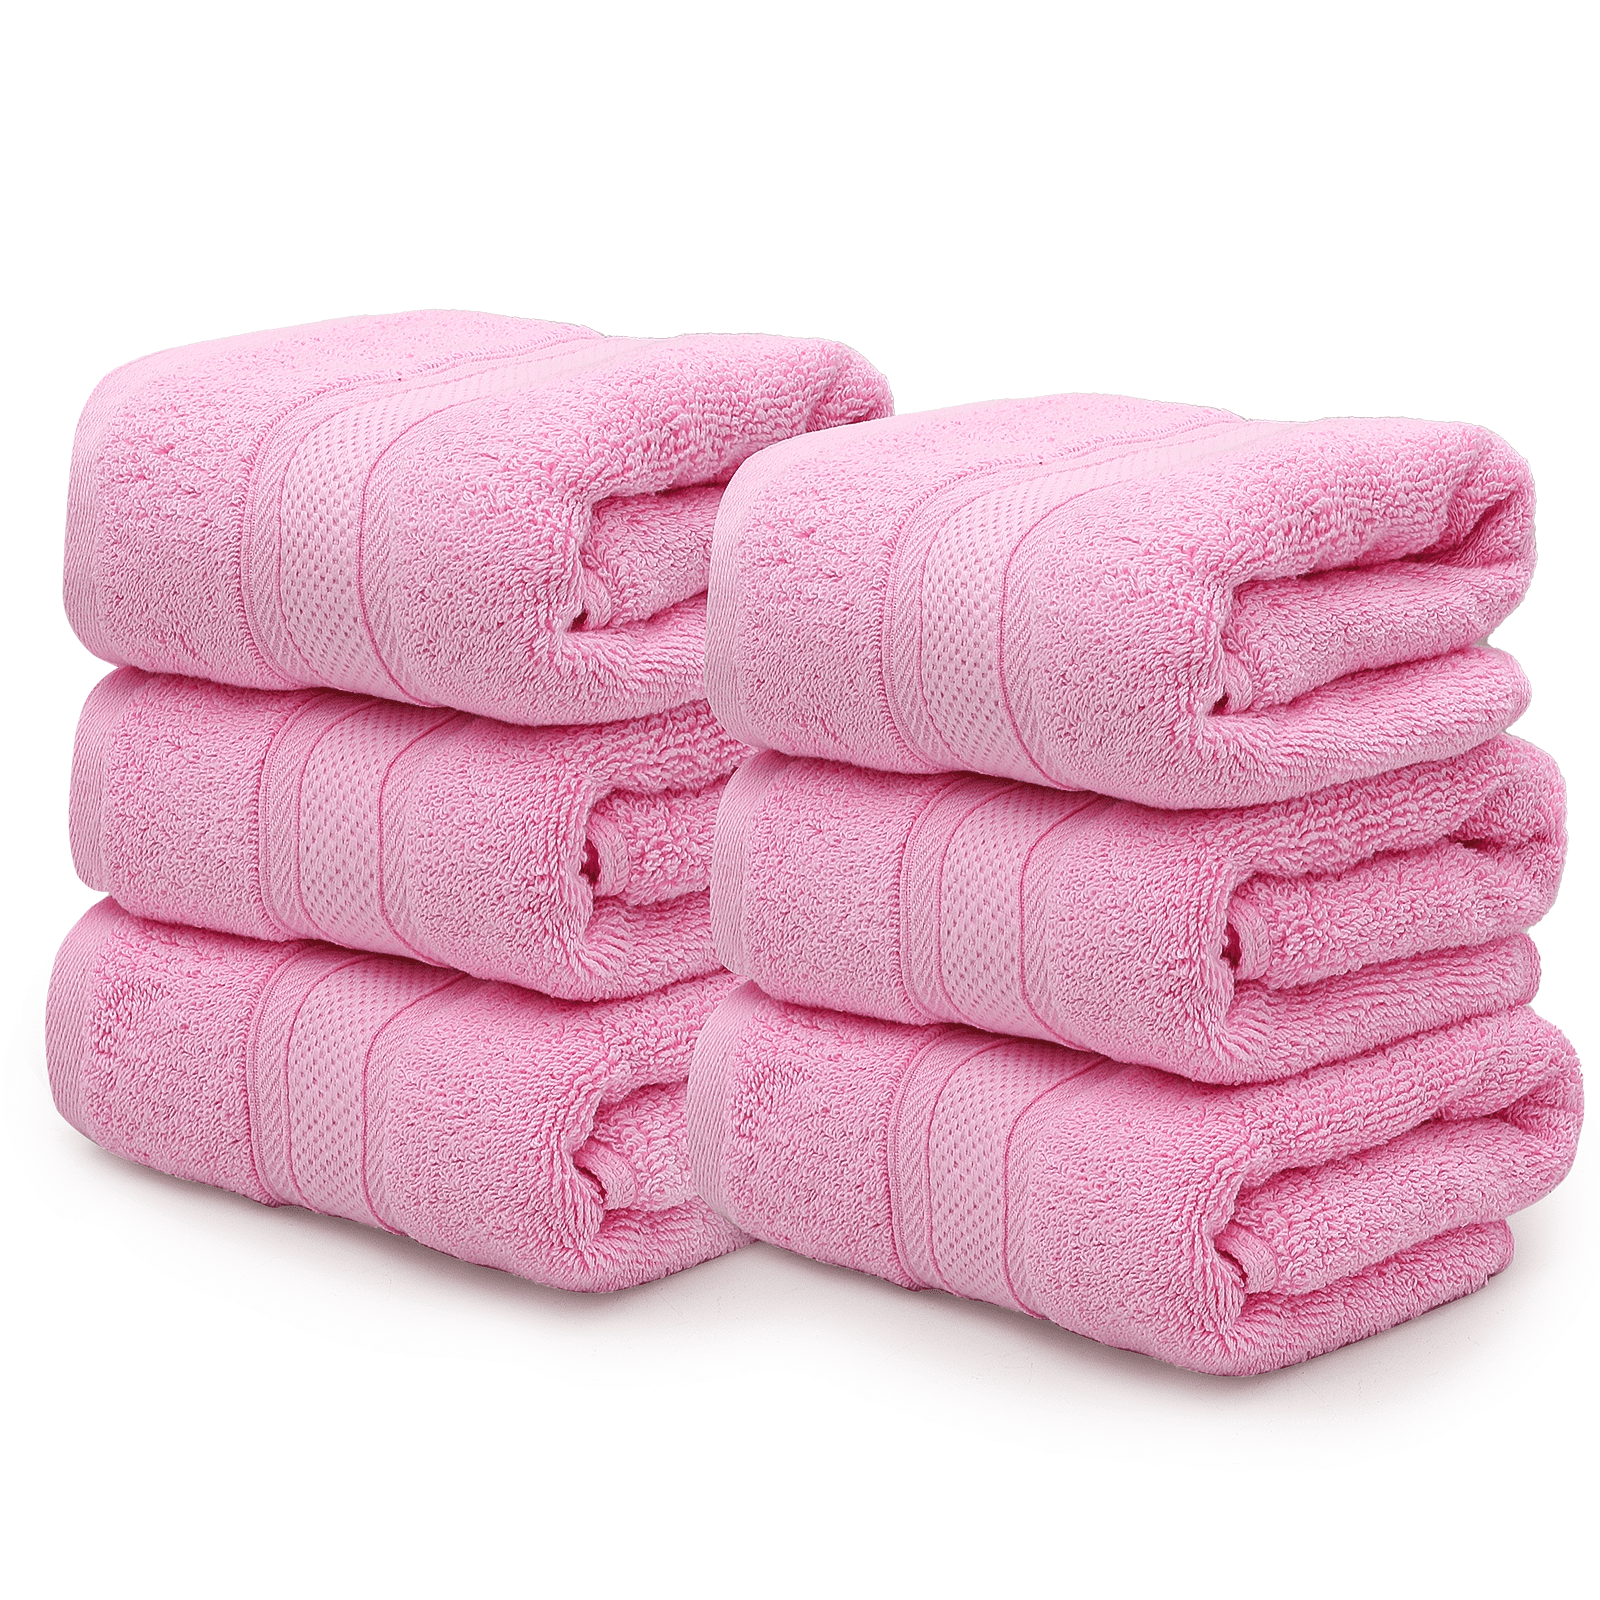 SUPERIOR Eco-Friendly Cotton 6-Piece Hand Towel Set, Small Towels for Spa,  Resort, Hotel, Guest Bath, Kitchen, Quick Dry, Soft, Bathroom Accessories